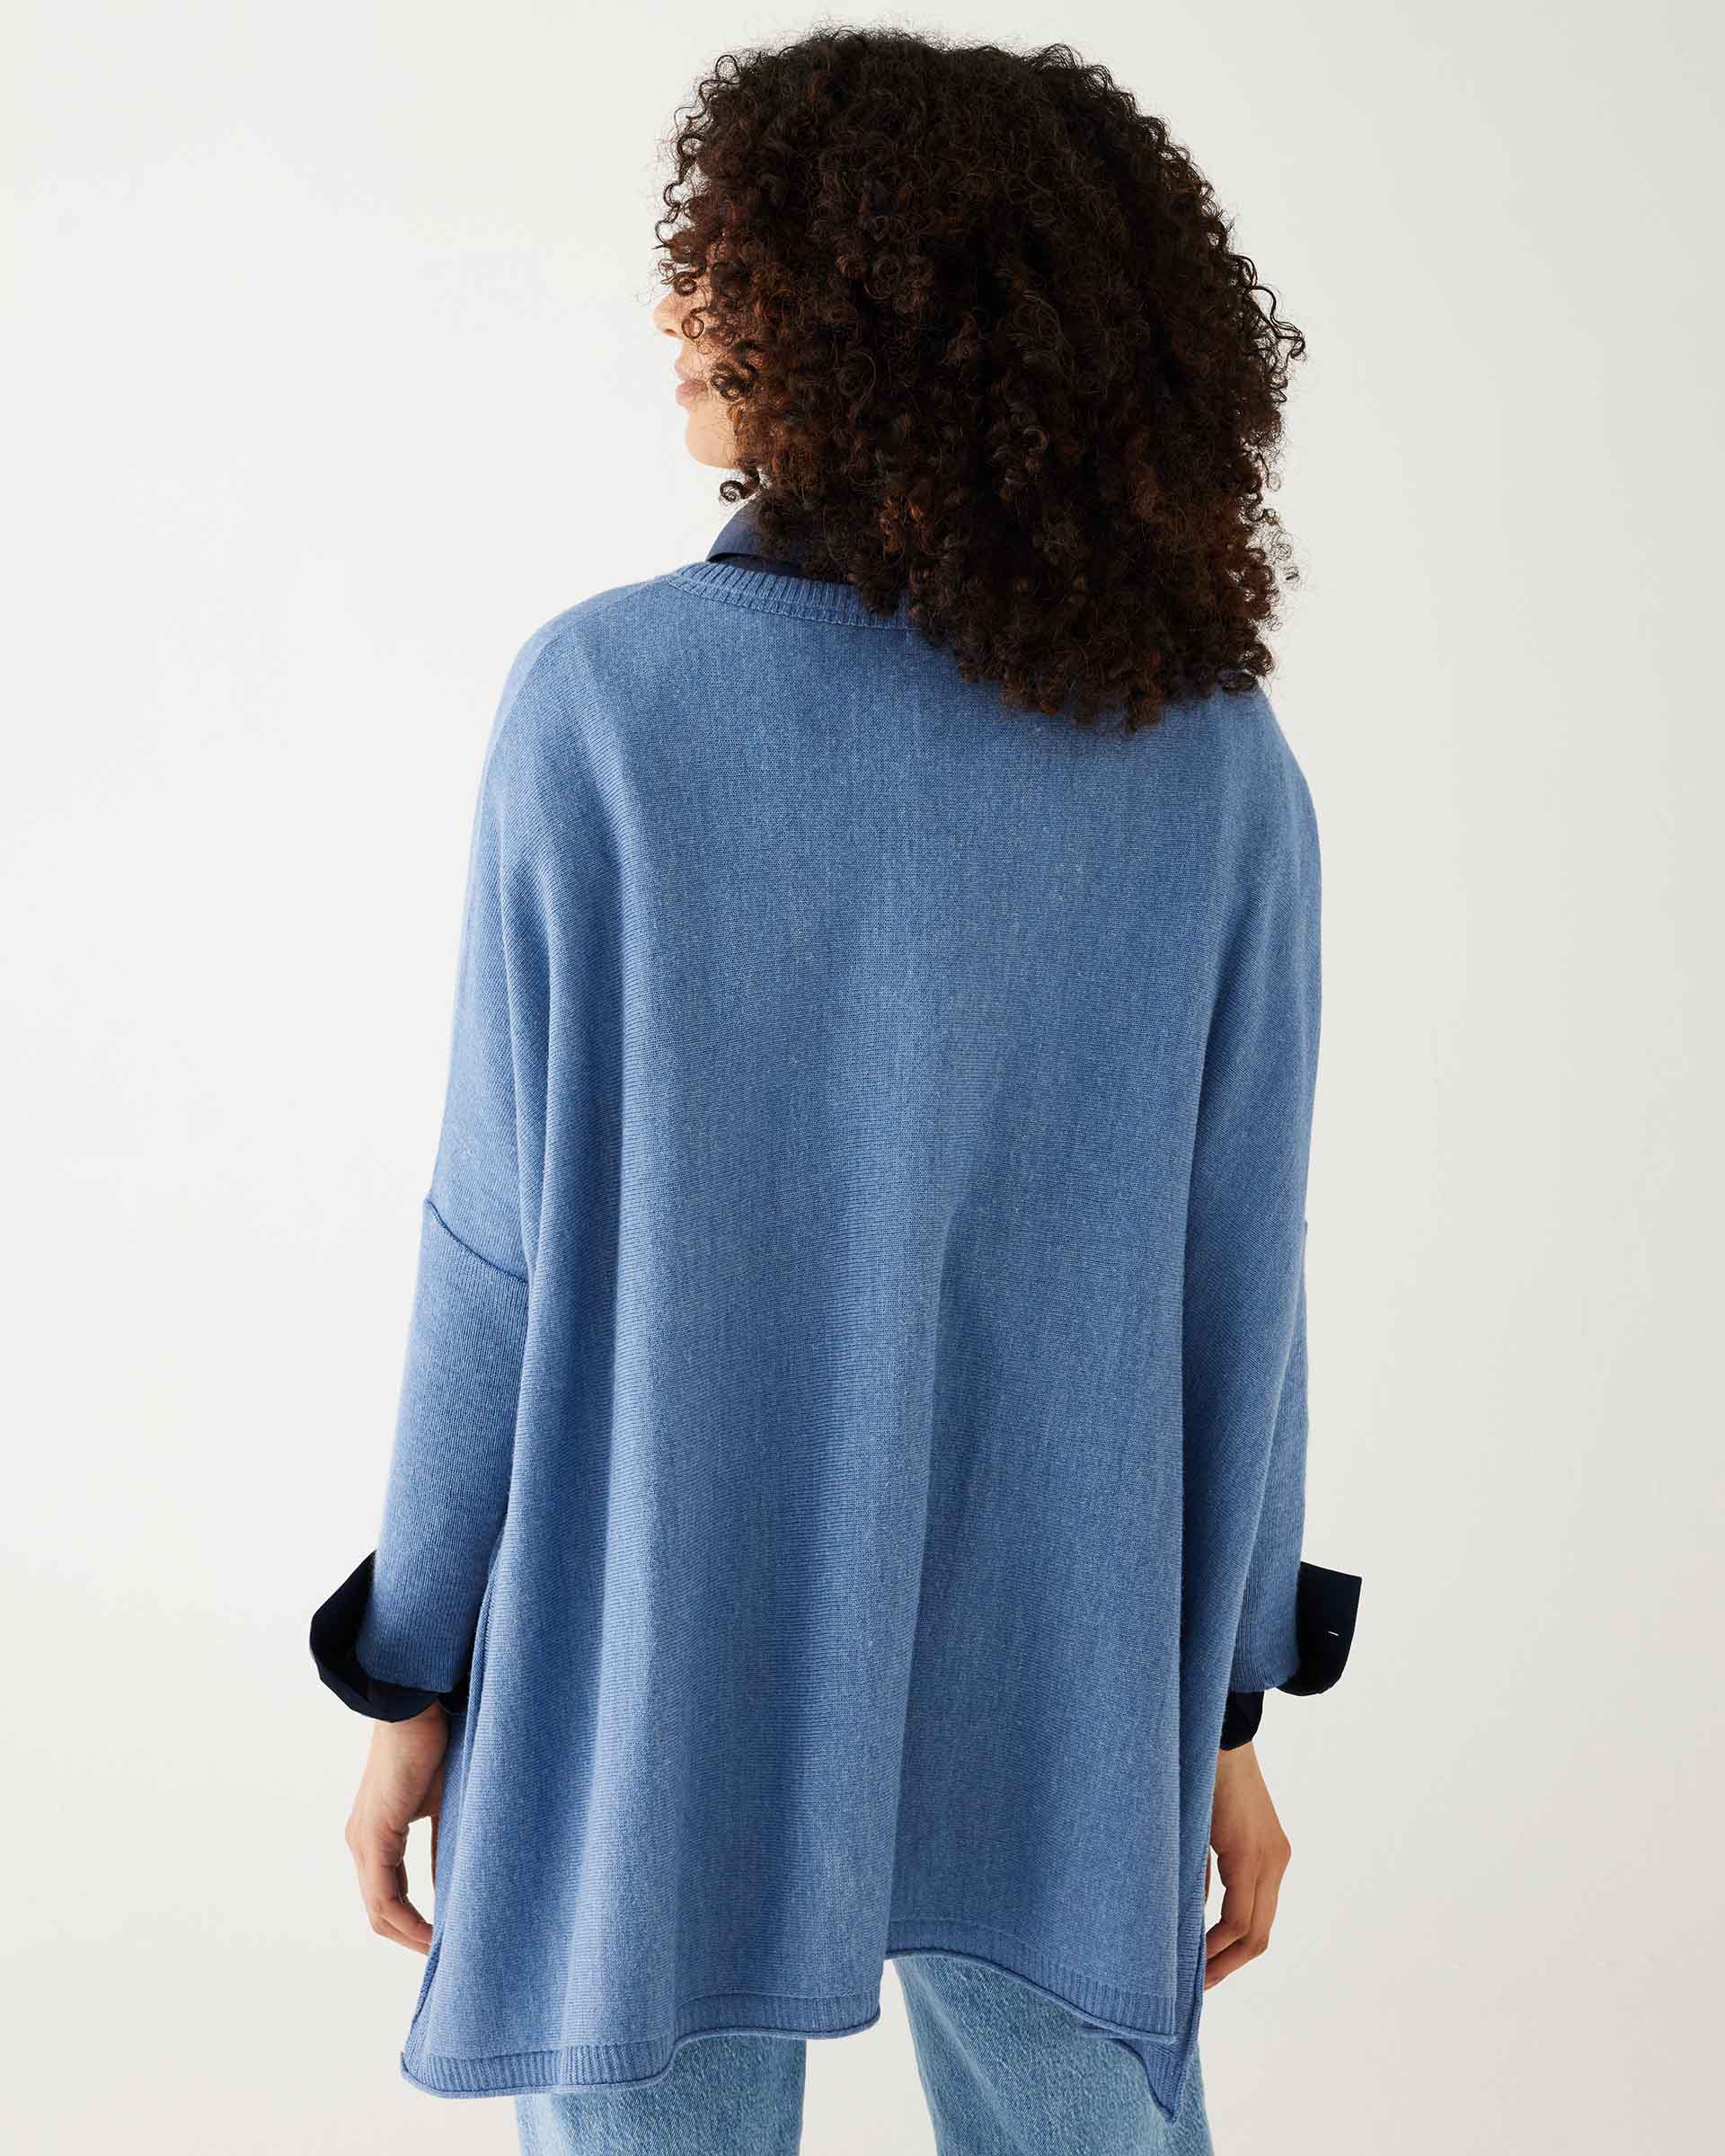 female wearing deep blue sweater with blue shirt cuffed backward on a white background